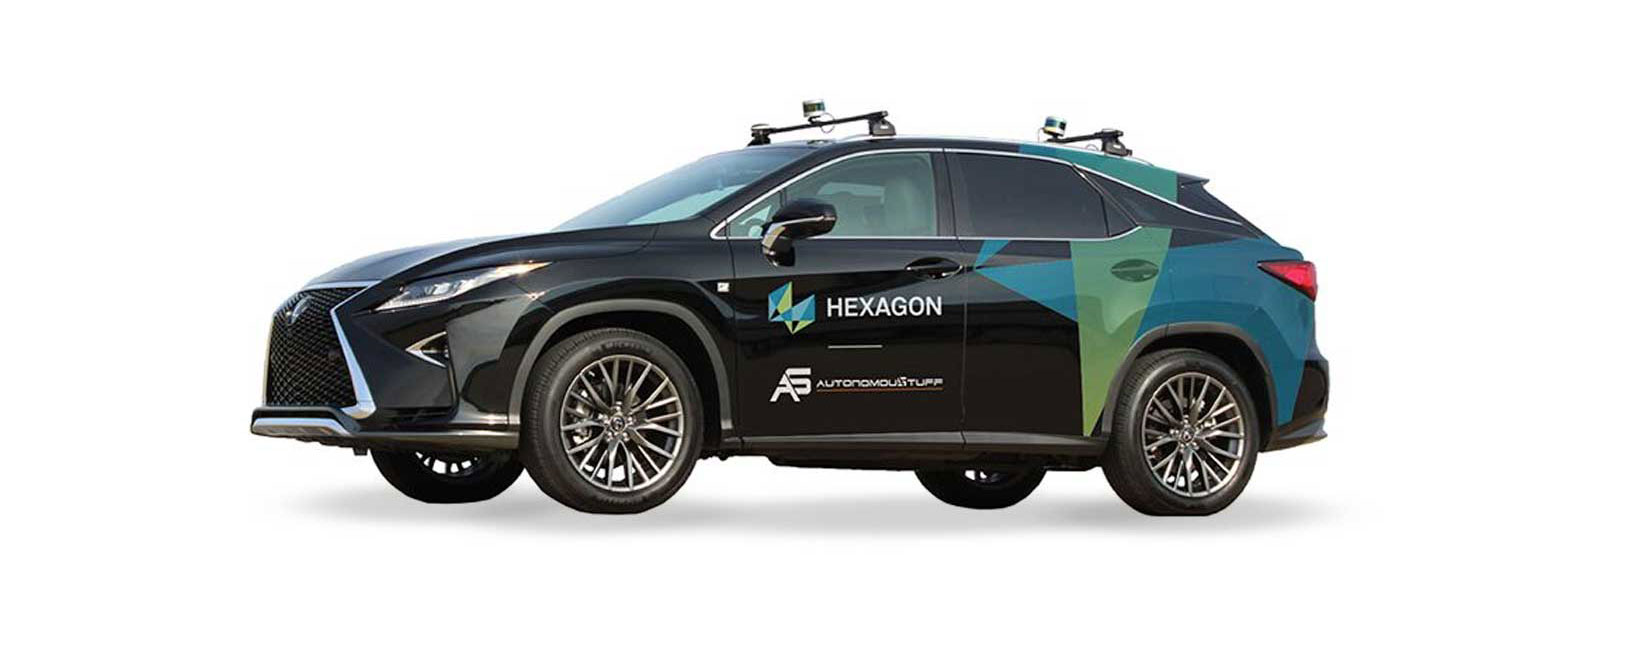 View of Hexagon-branded vehicle with drive by wire capabilities